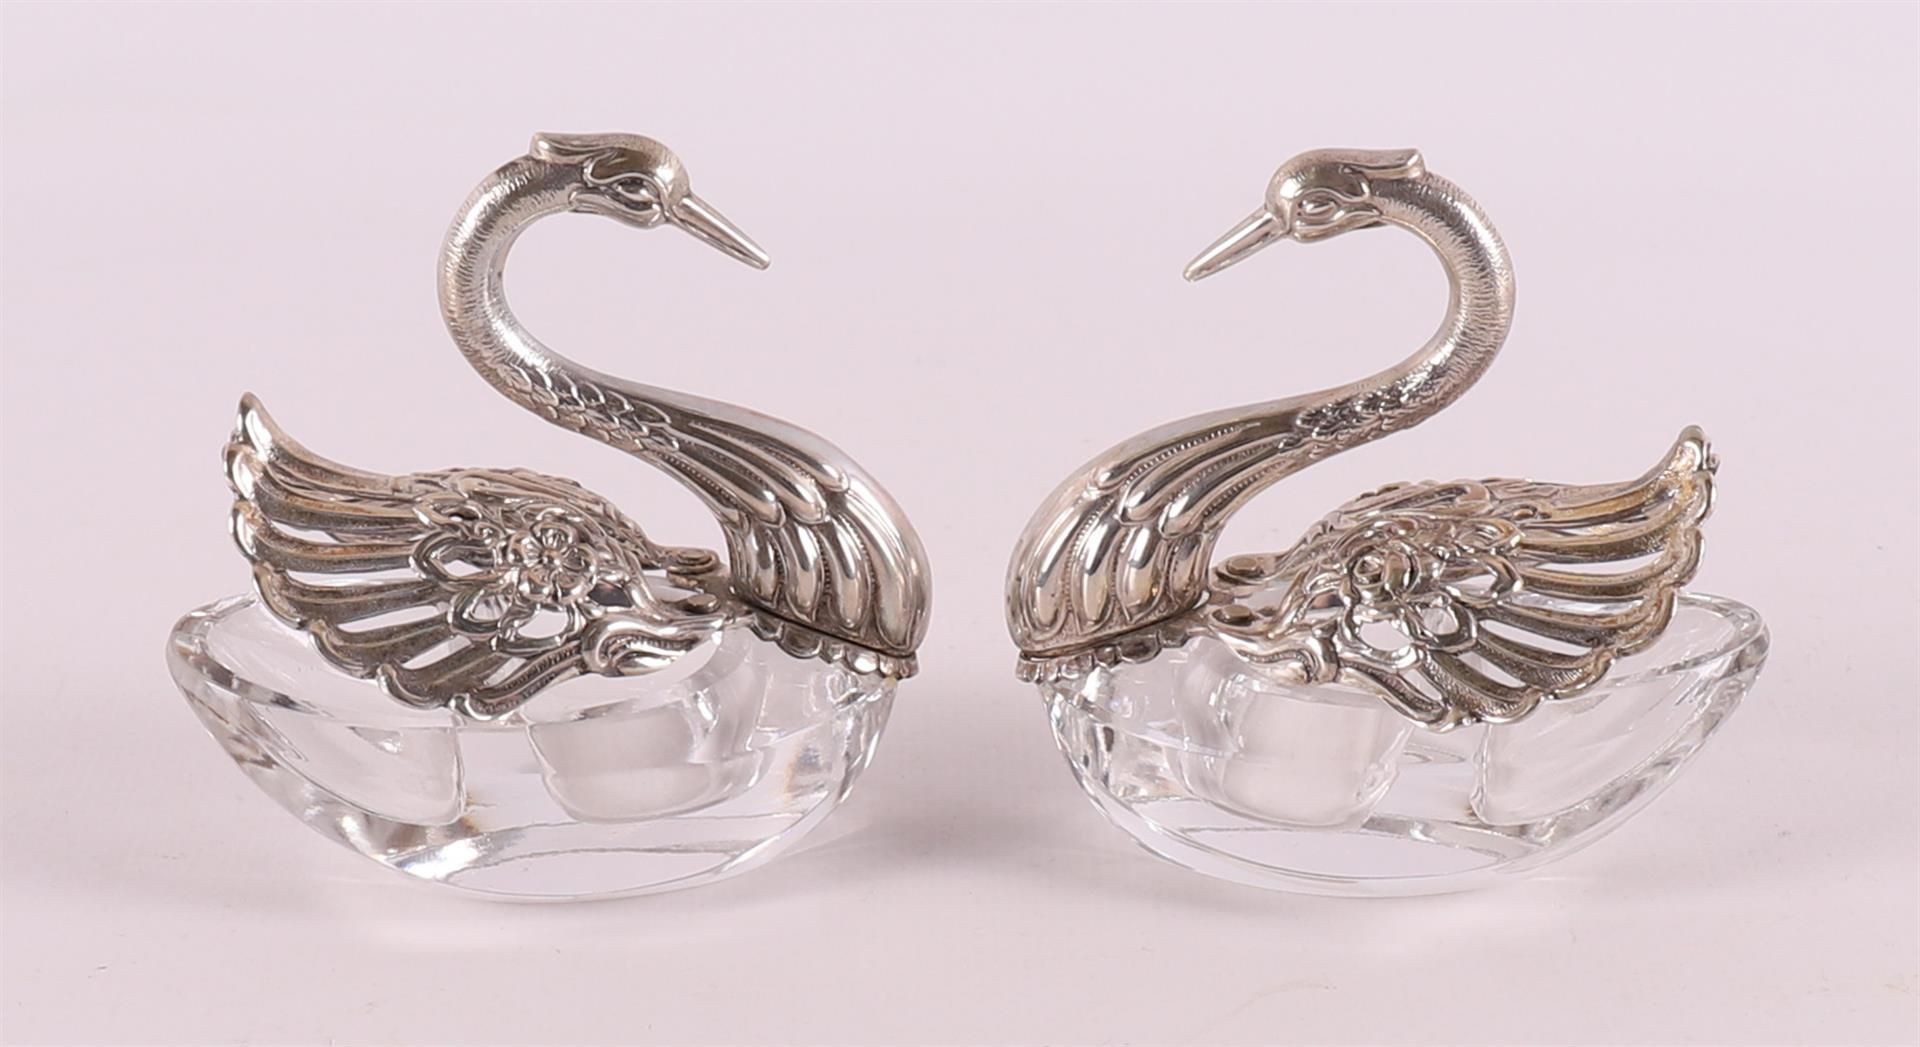 Two white and silver salt shakers in the shape of swans, 20th century.